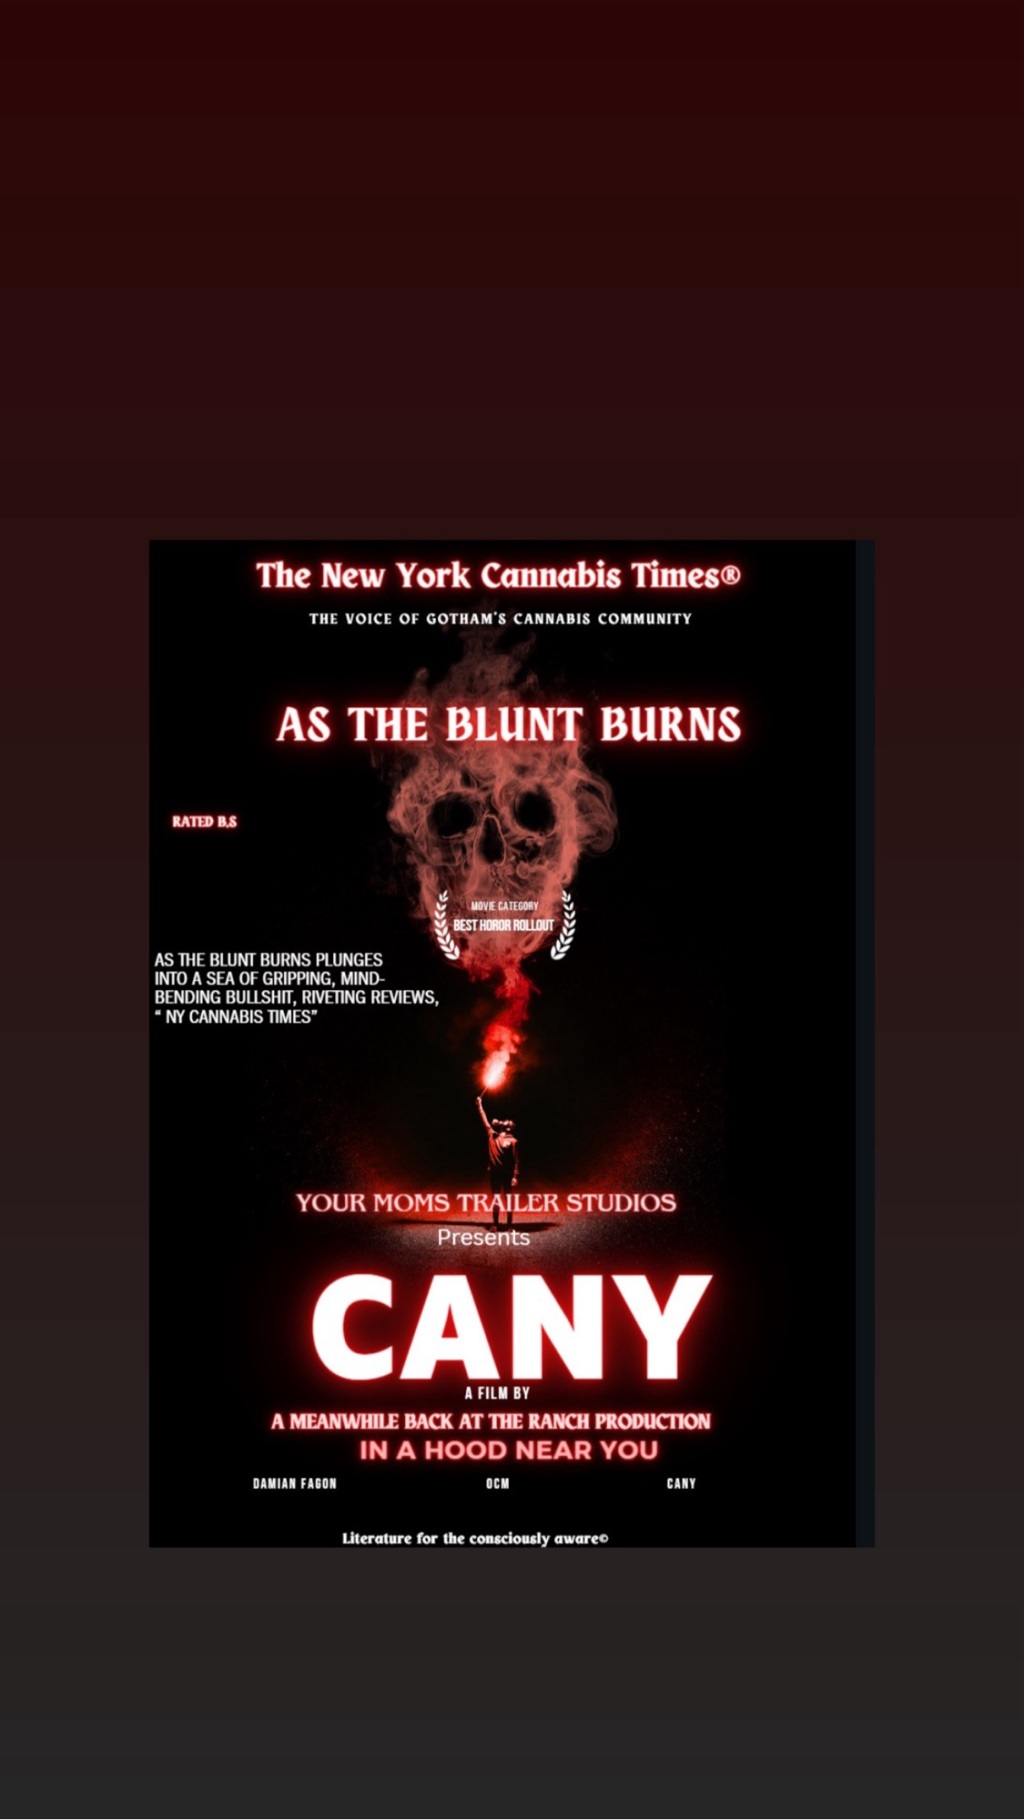 As the Blunt Burns NYC rollout